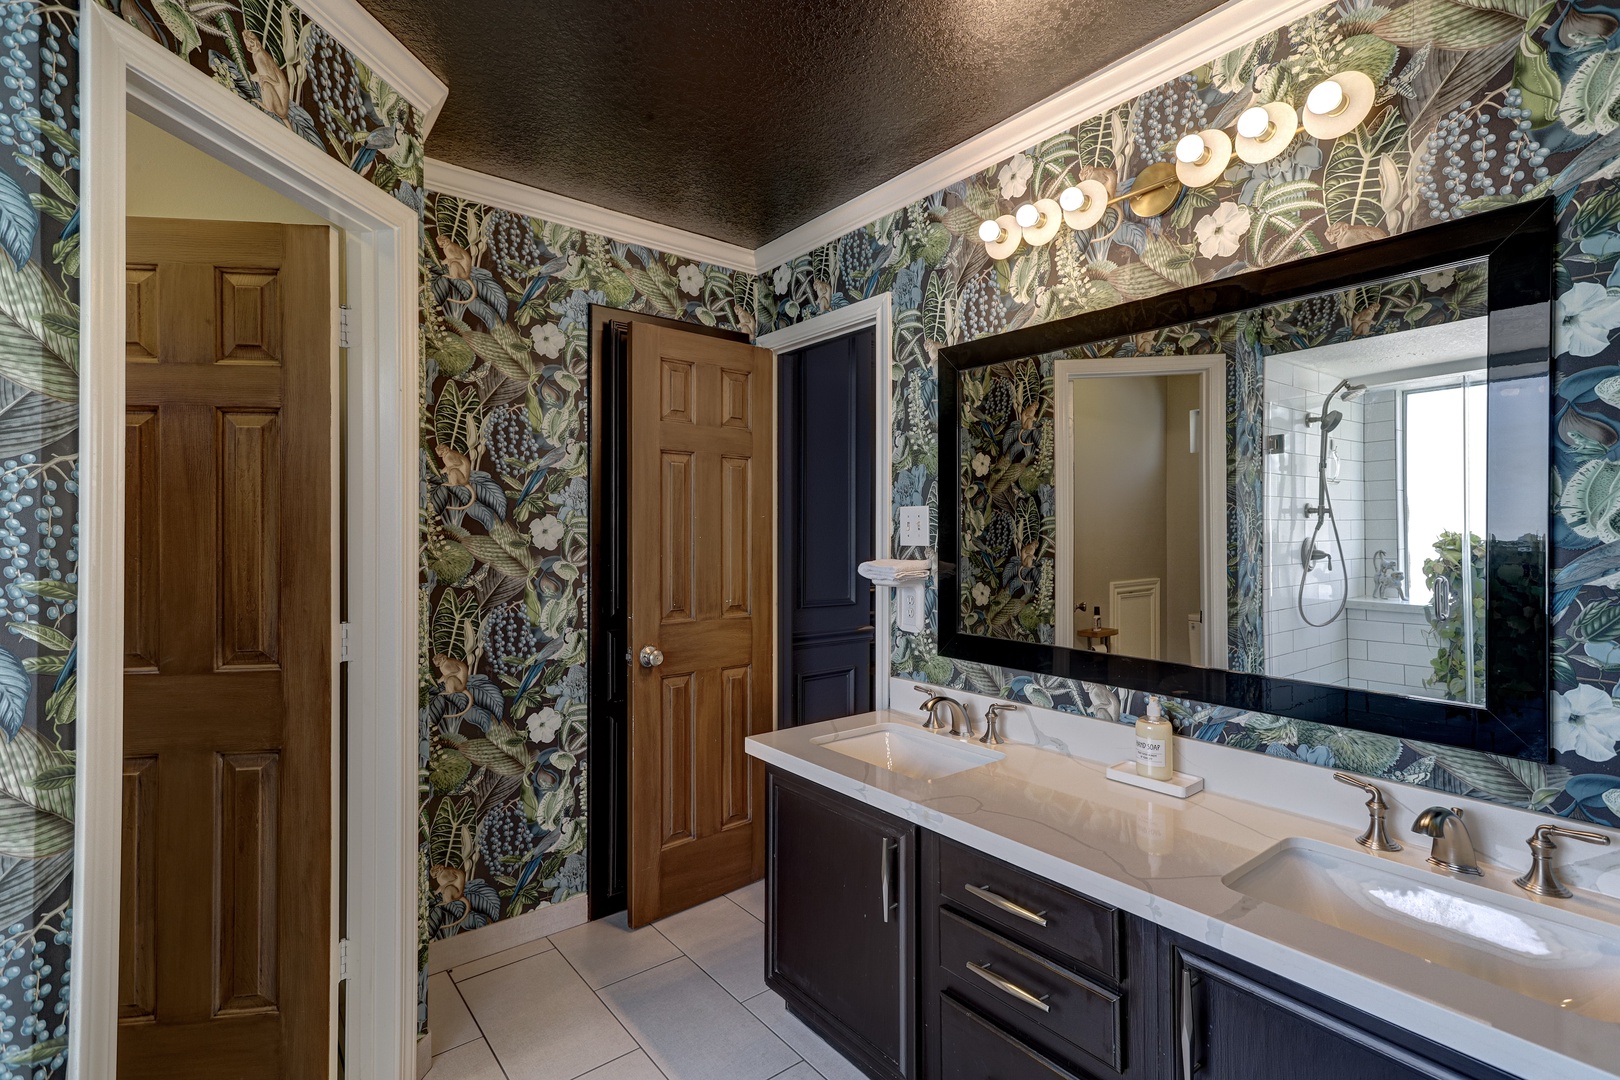 This ensuite features a double vanity, walk-in closet, & luxurious glass shower